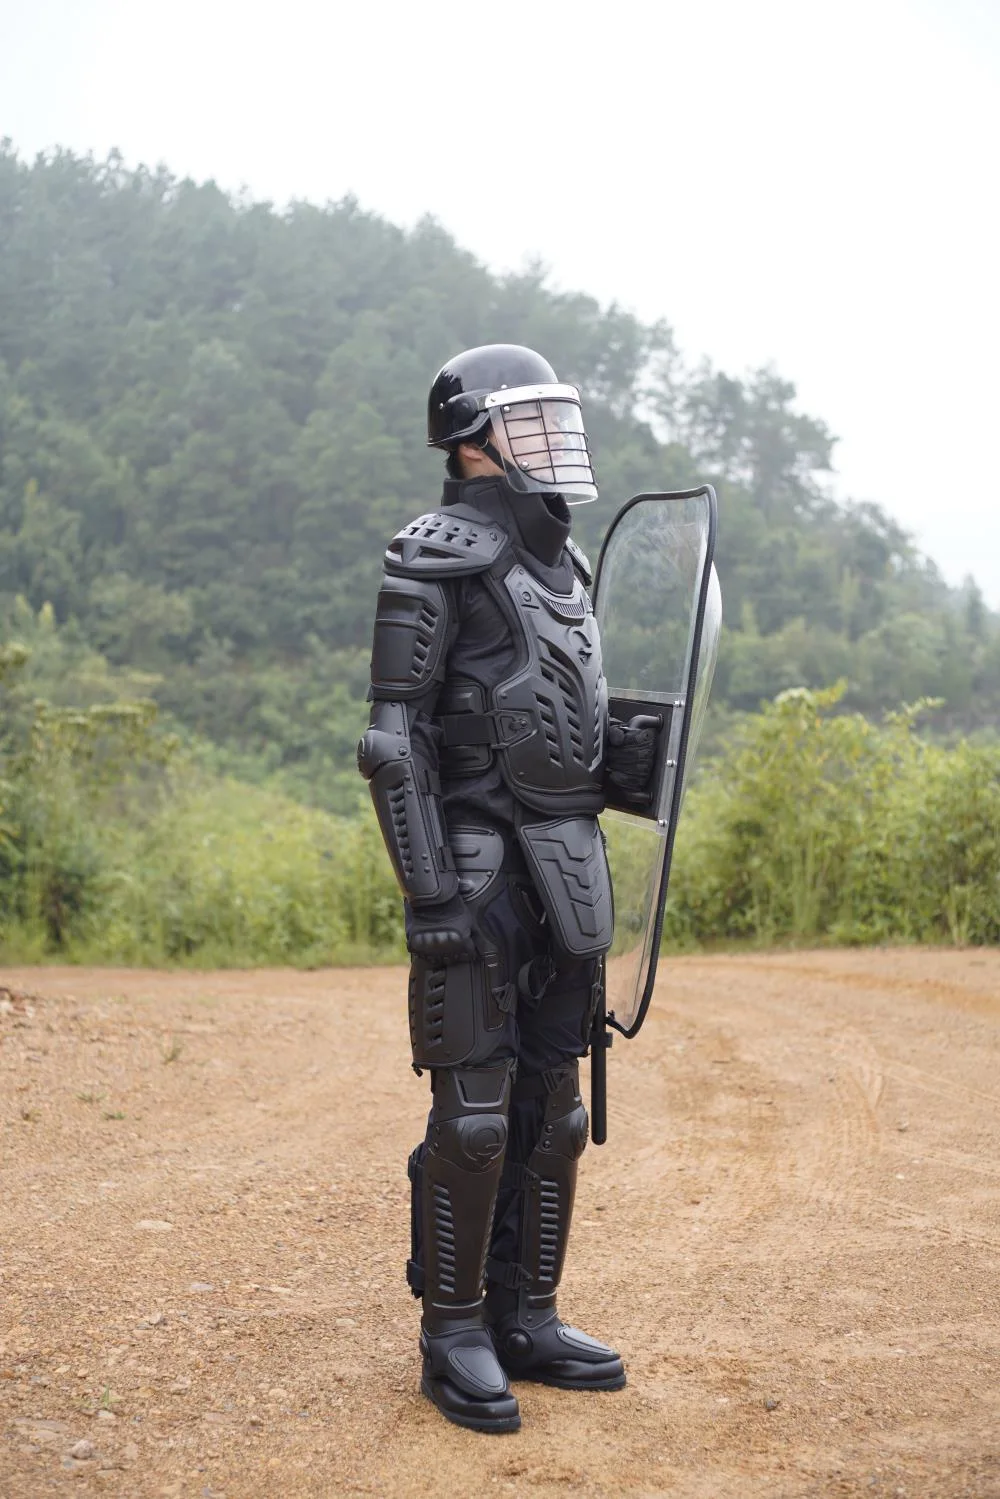 Tactical High Protection Light Weight Anti Riot Suit Police Equipment Full Body Suit Anti Riot Gear